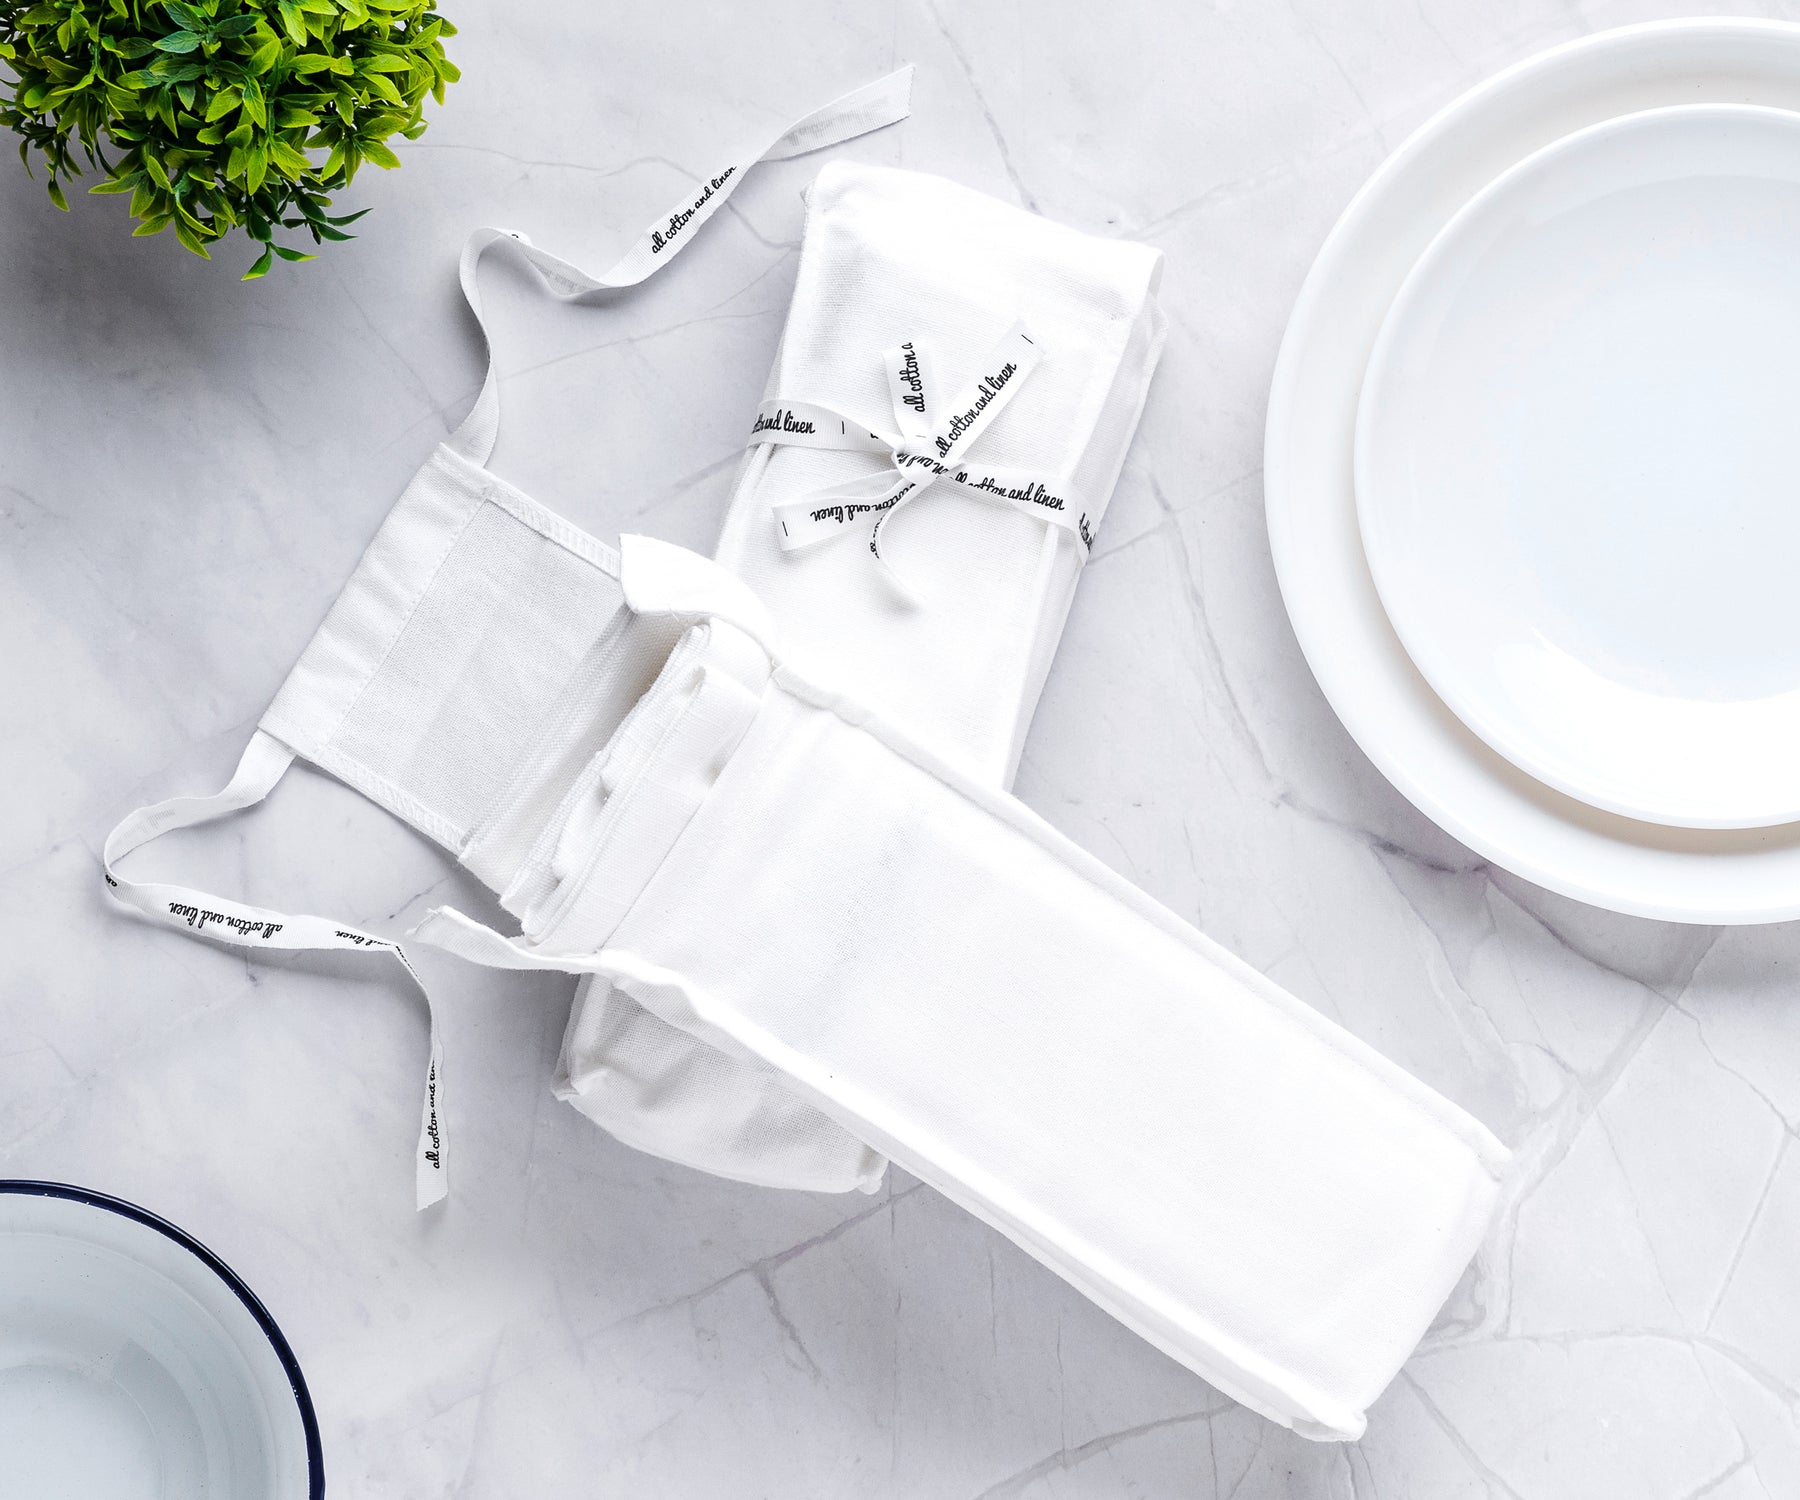 White plate and bistro napkin setup with cutlery